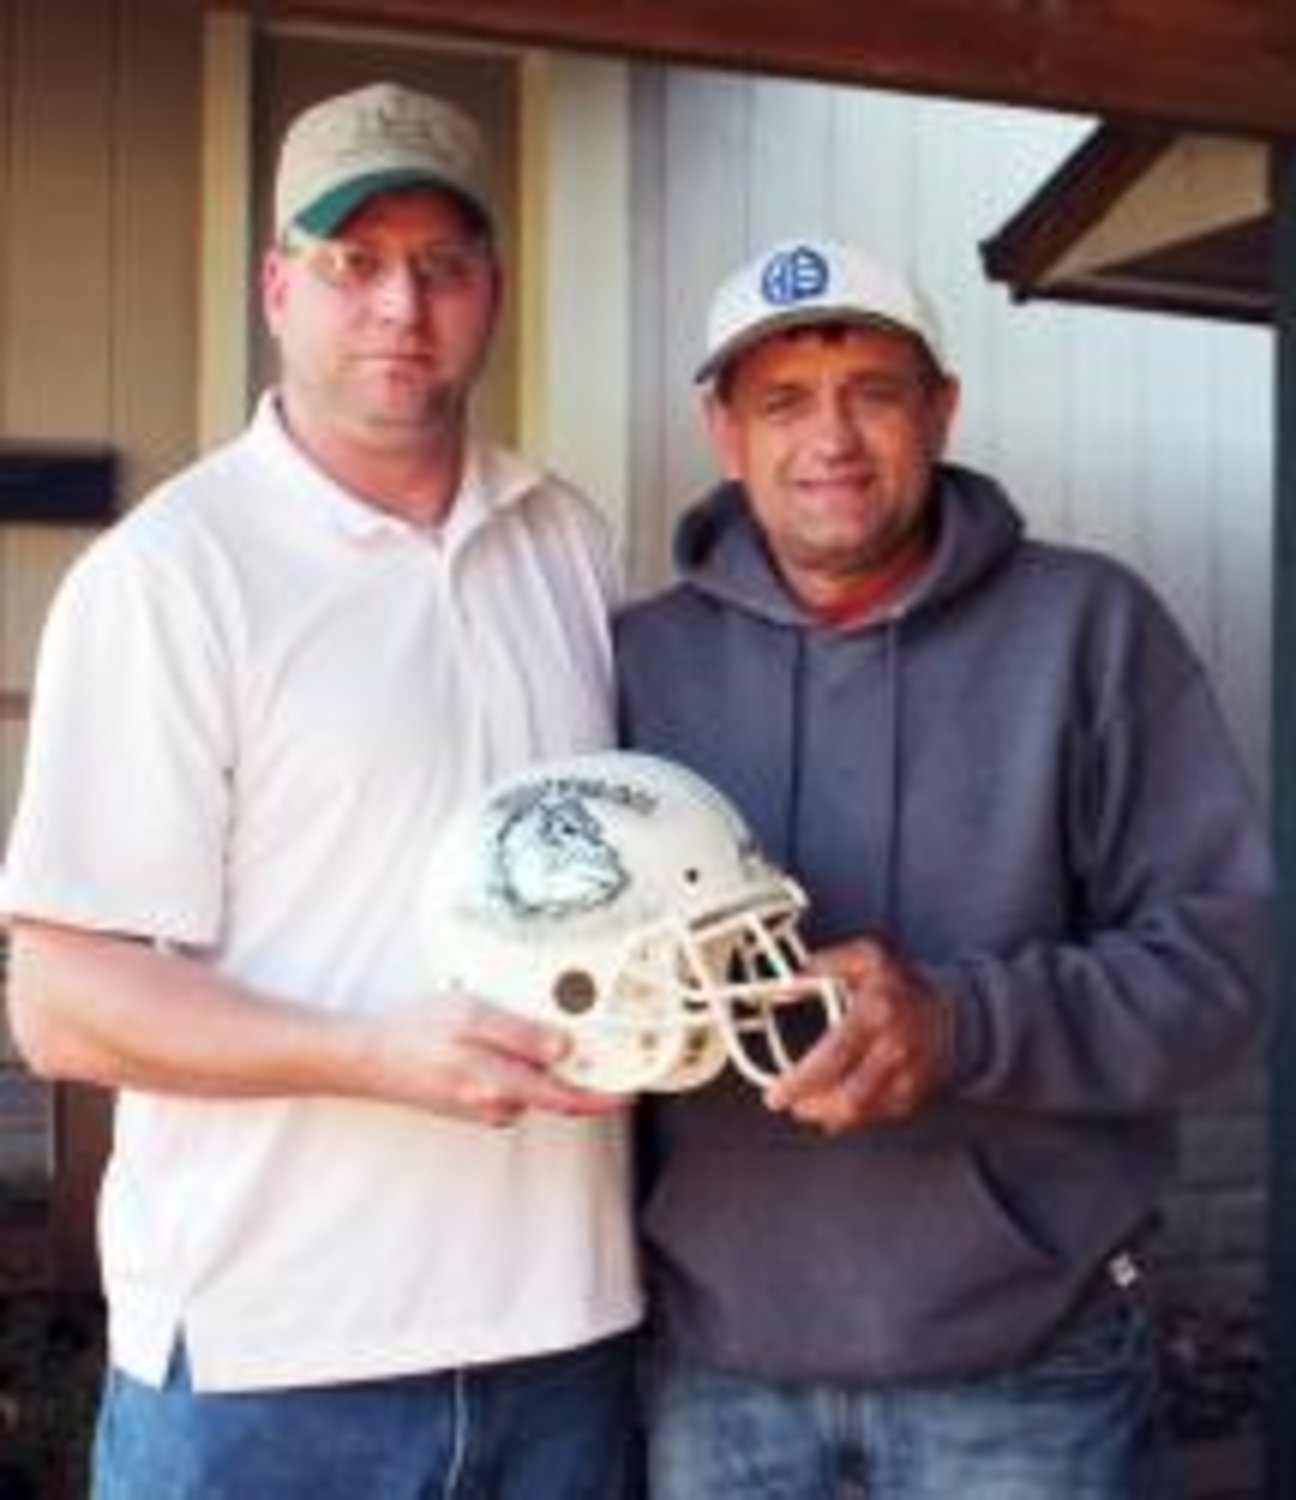 James Wood, president of the Quitman PeeWee Association, presented Quitman ISD's former head football coach and athletic director, Ron Callahan, with a special helmet. The helmet commemorates all the hard work Callahan put into the PeeWee Association to help it grow.